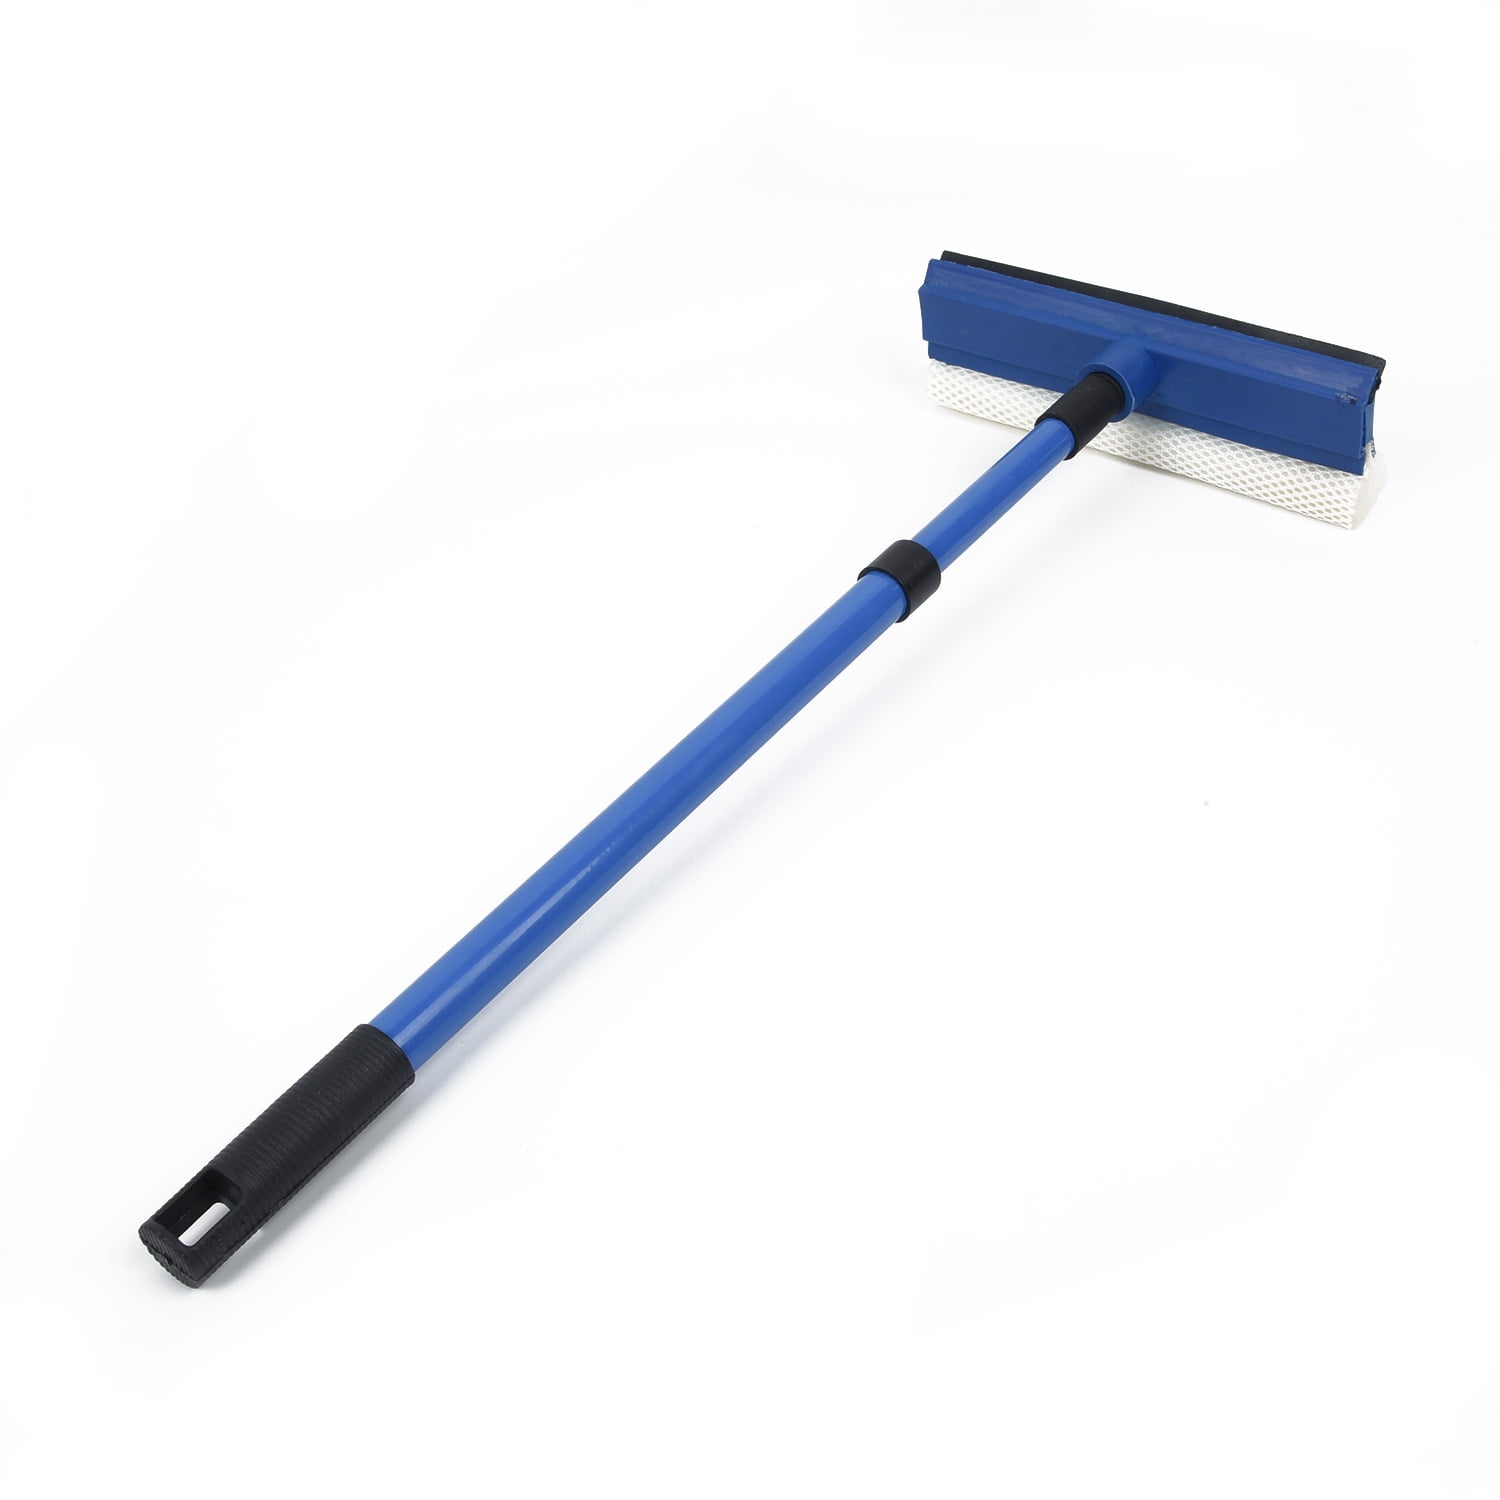 All Purpose Window Squeegee with 58 inch Long Handle, 2 Microfiber Pad –  ITTAHO